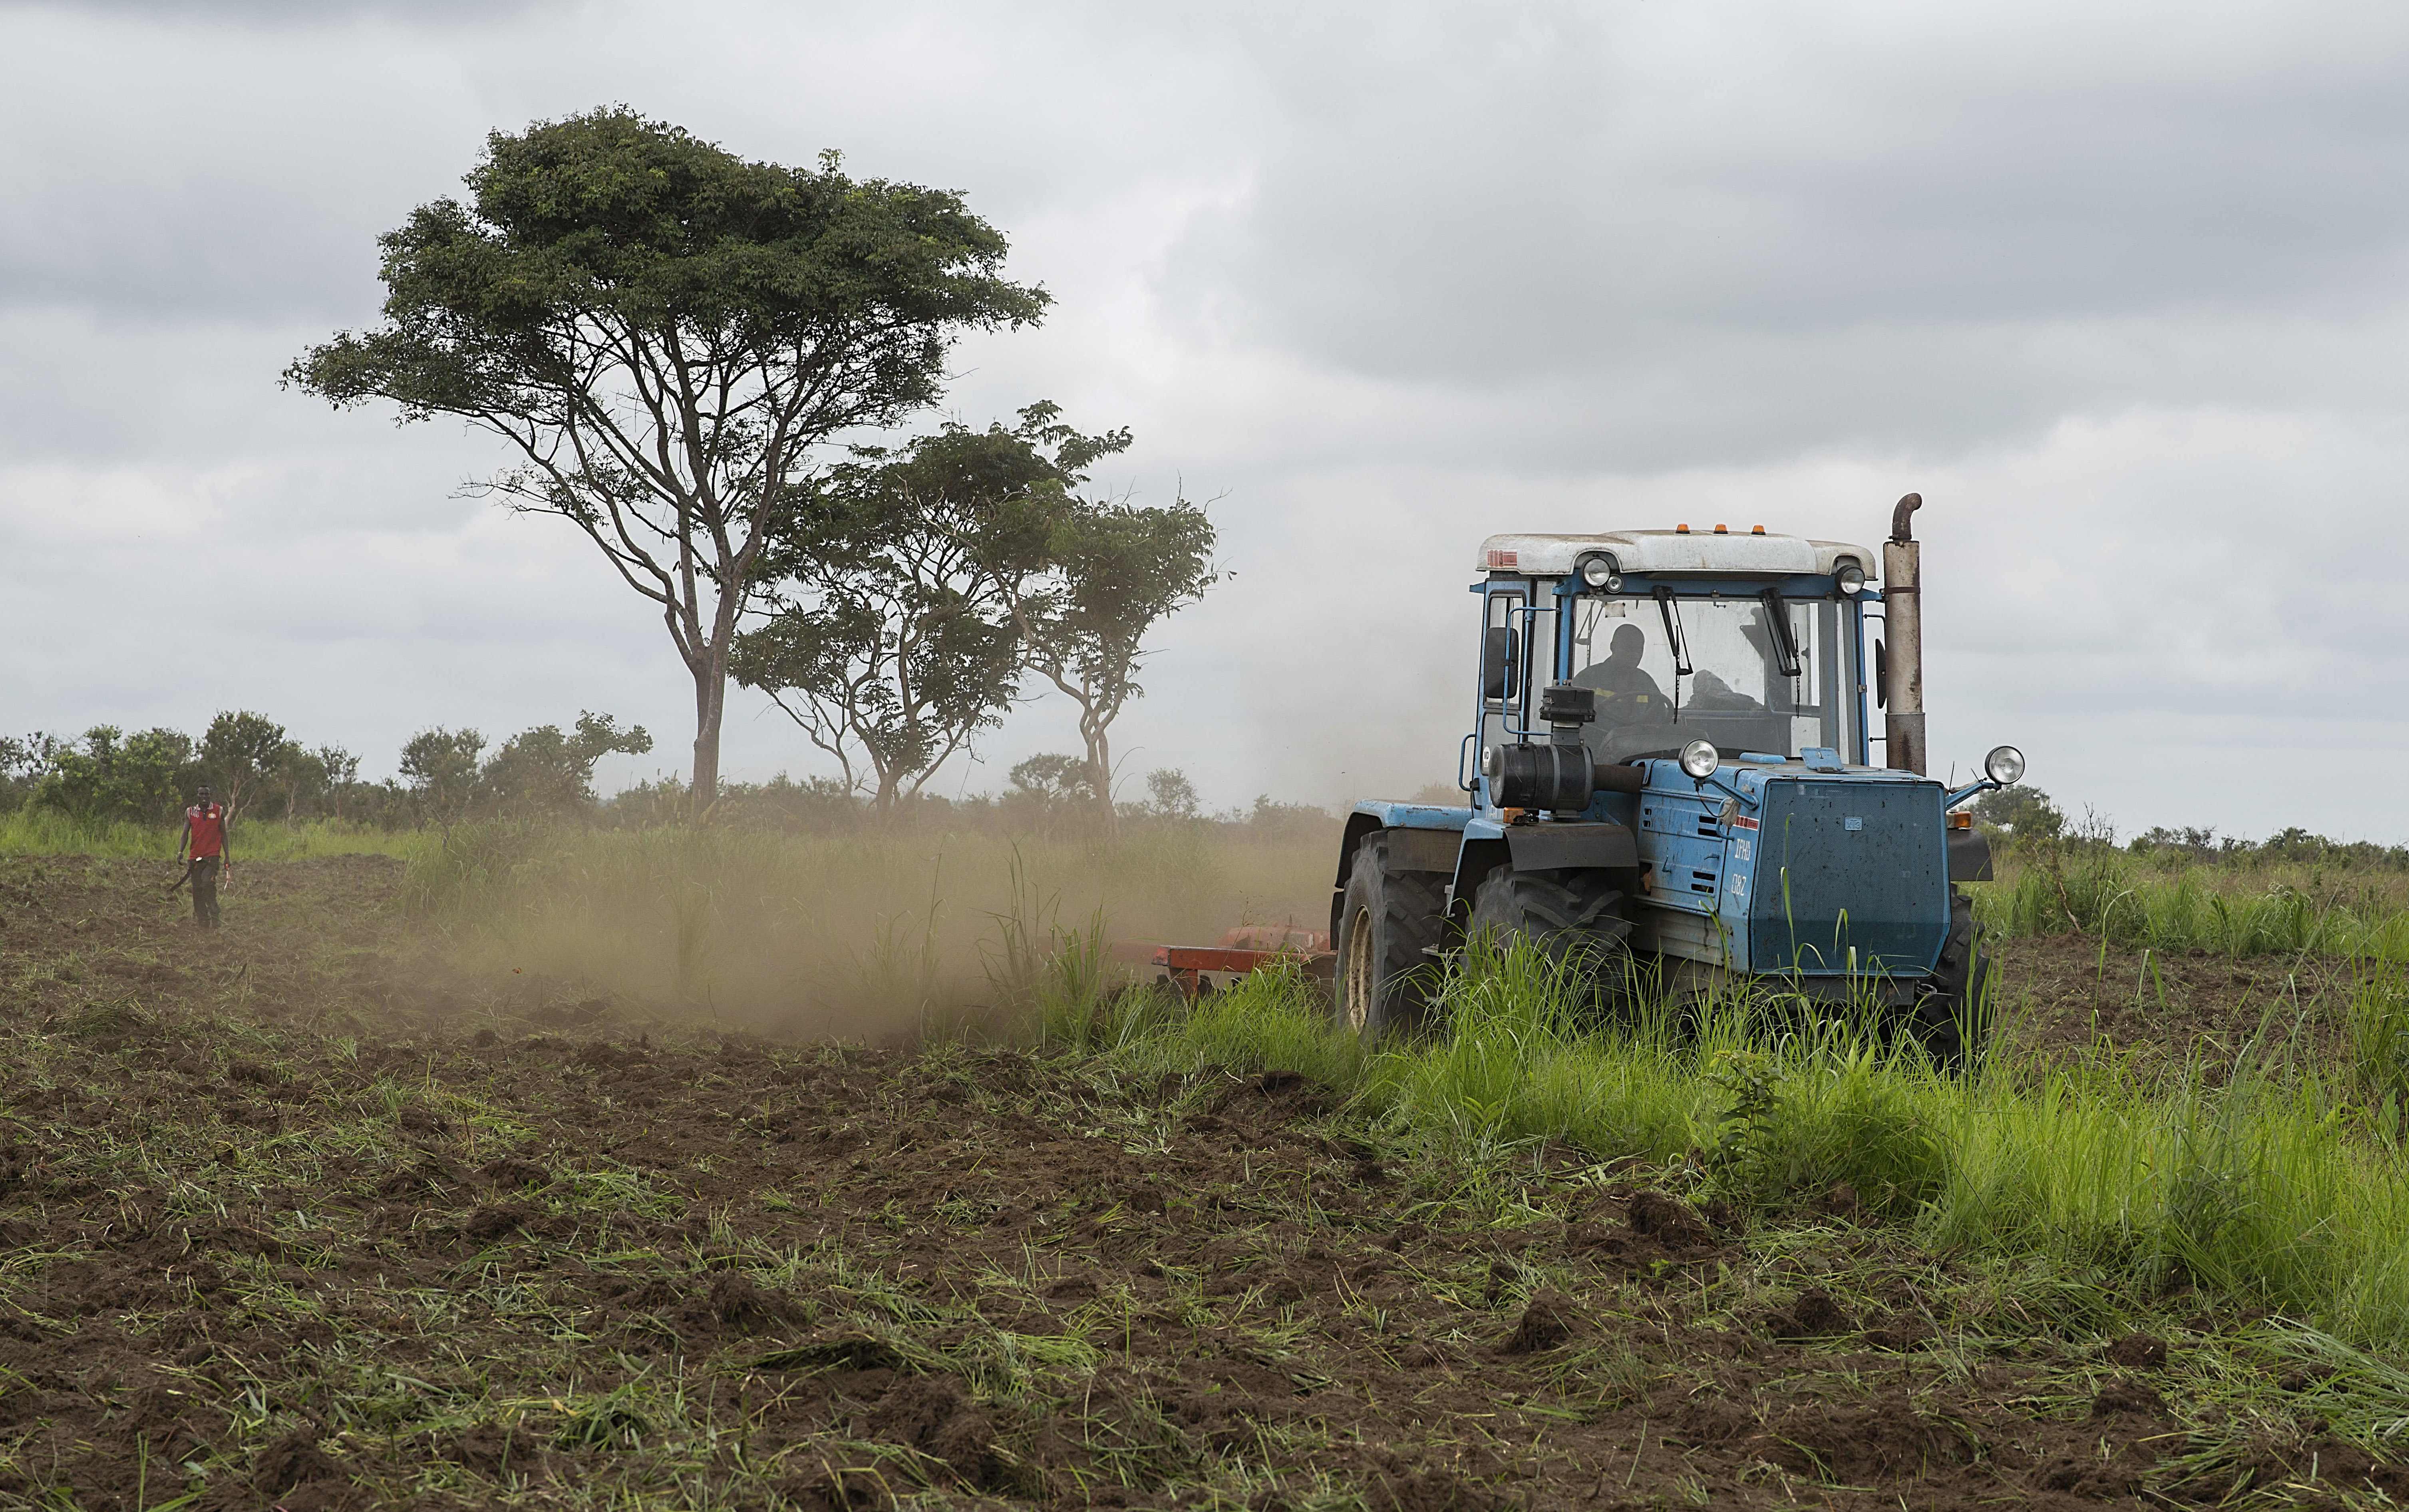 In search of effective support for agricultural mechanization in Africa